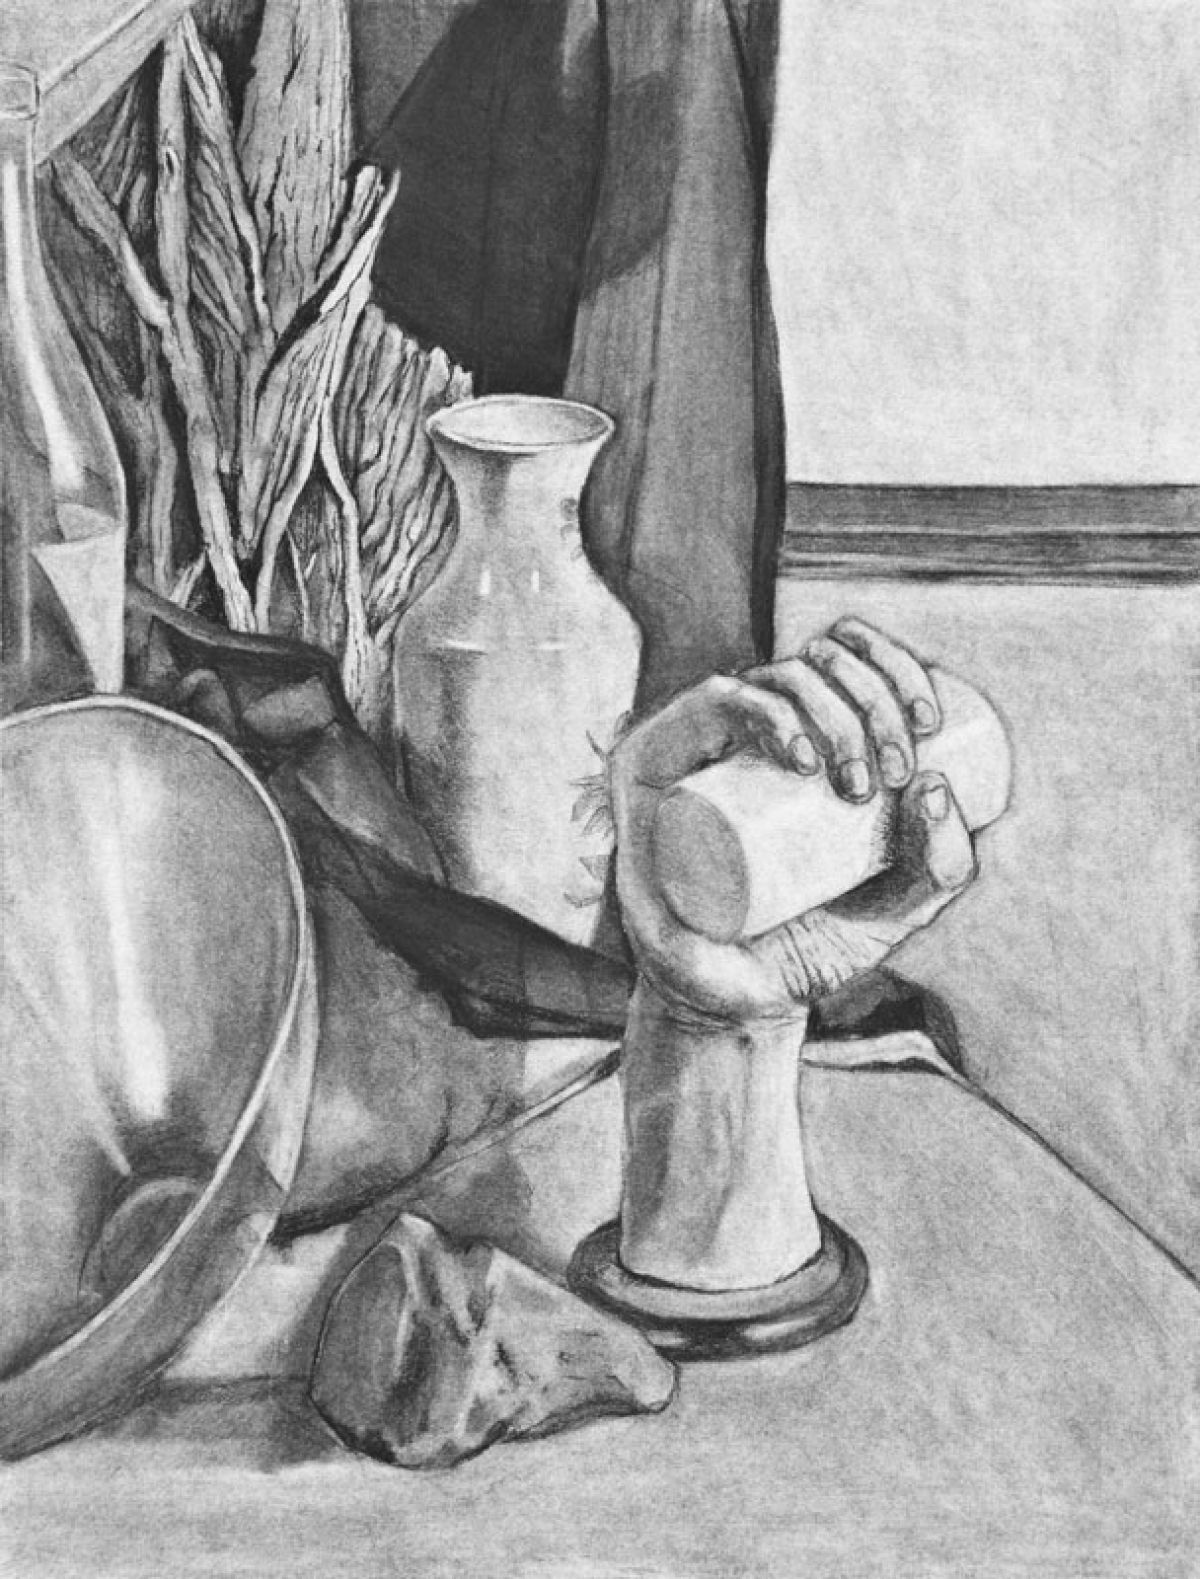 2009, Charcoal on Paper, 23 1/2 x 18 in.